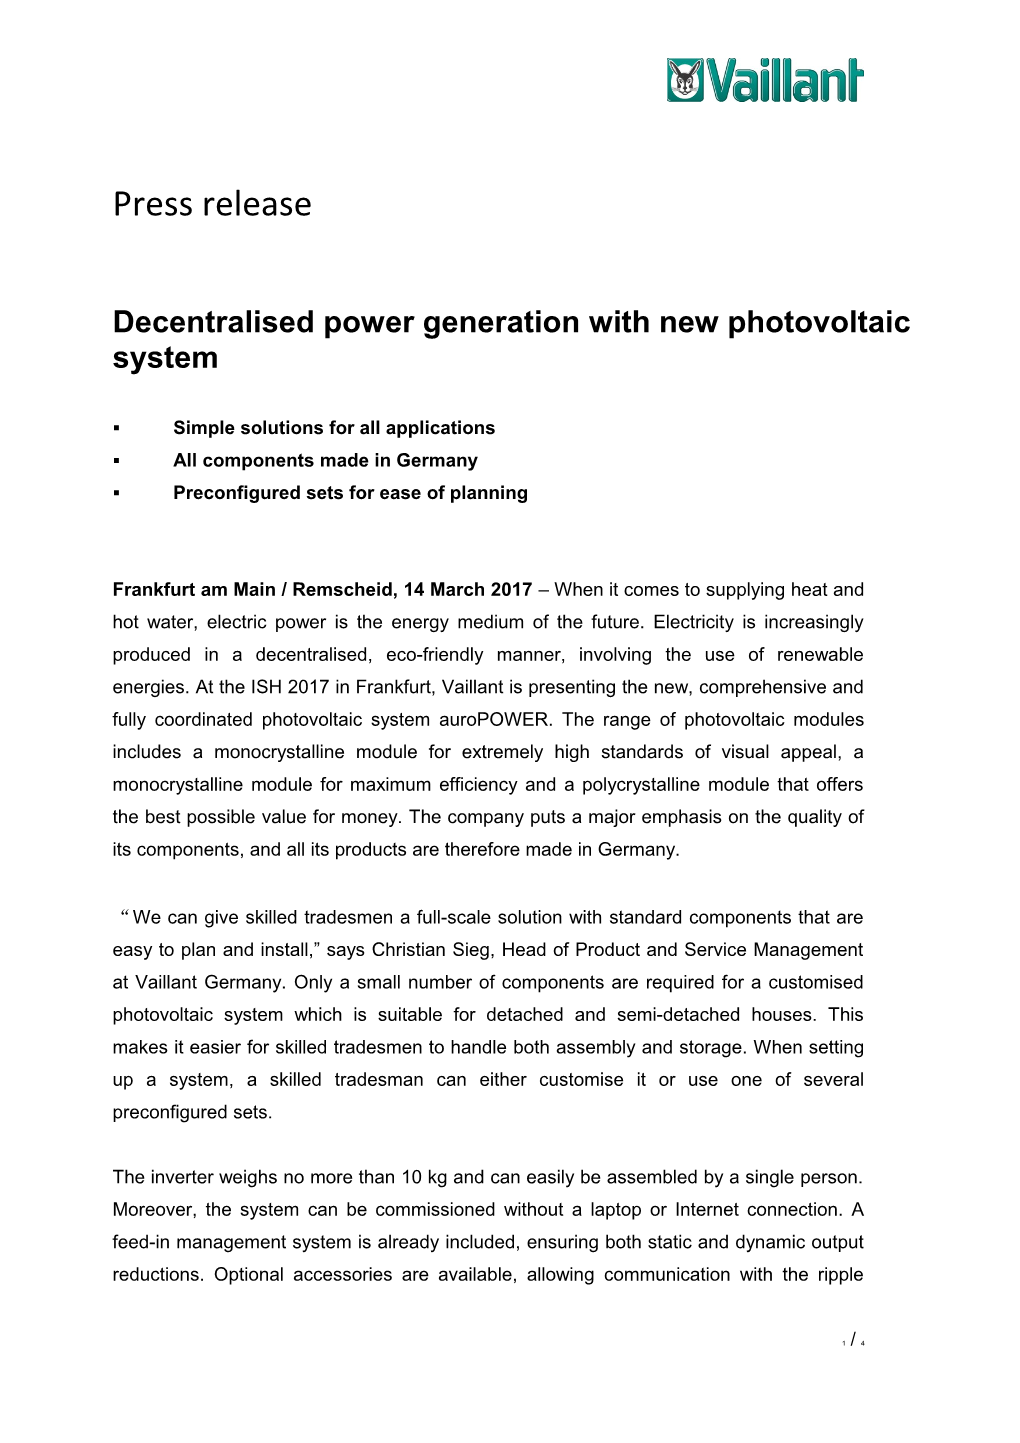 Decentralised Power Generation with New Photovoltaic System